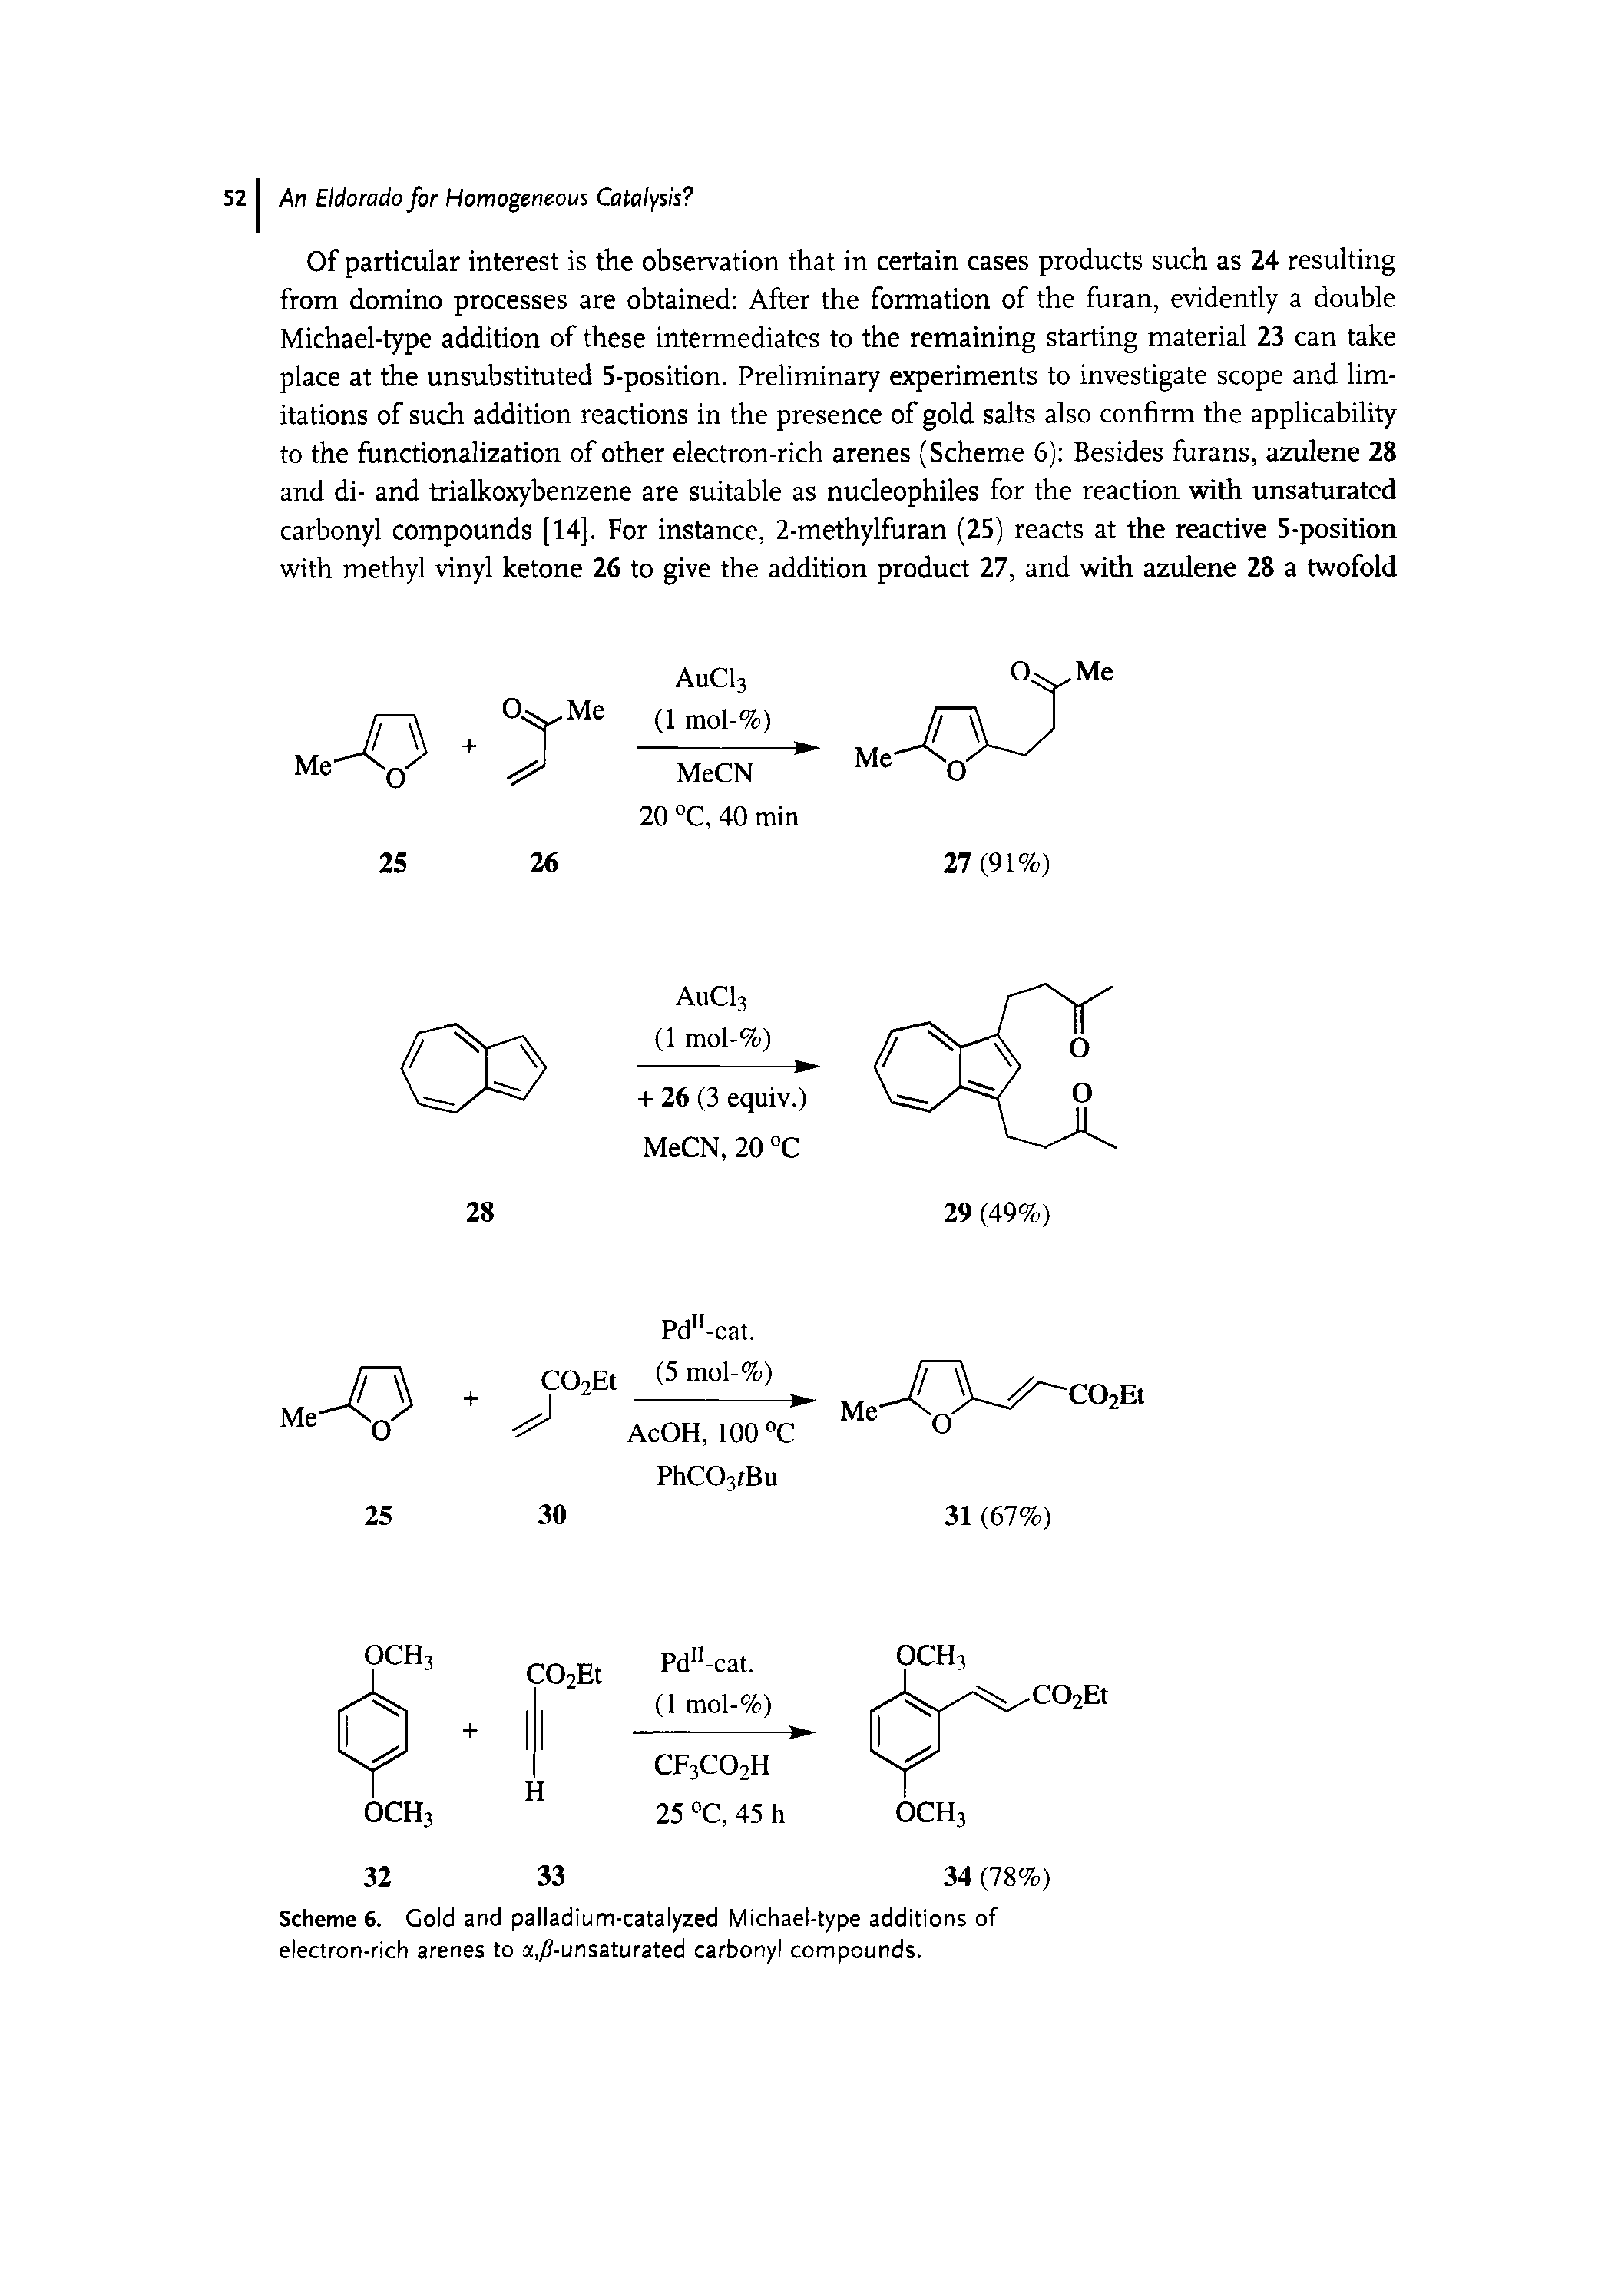 Scheme 6. Gold and palladium-catalyzed Michael-type additions of electron-rich arenes to a,/ -unsaturated carbonyl compounds.